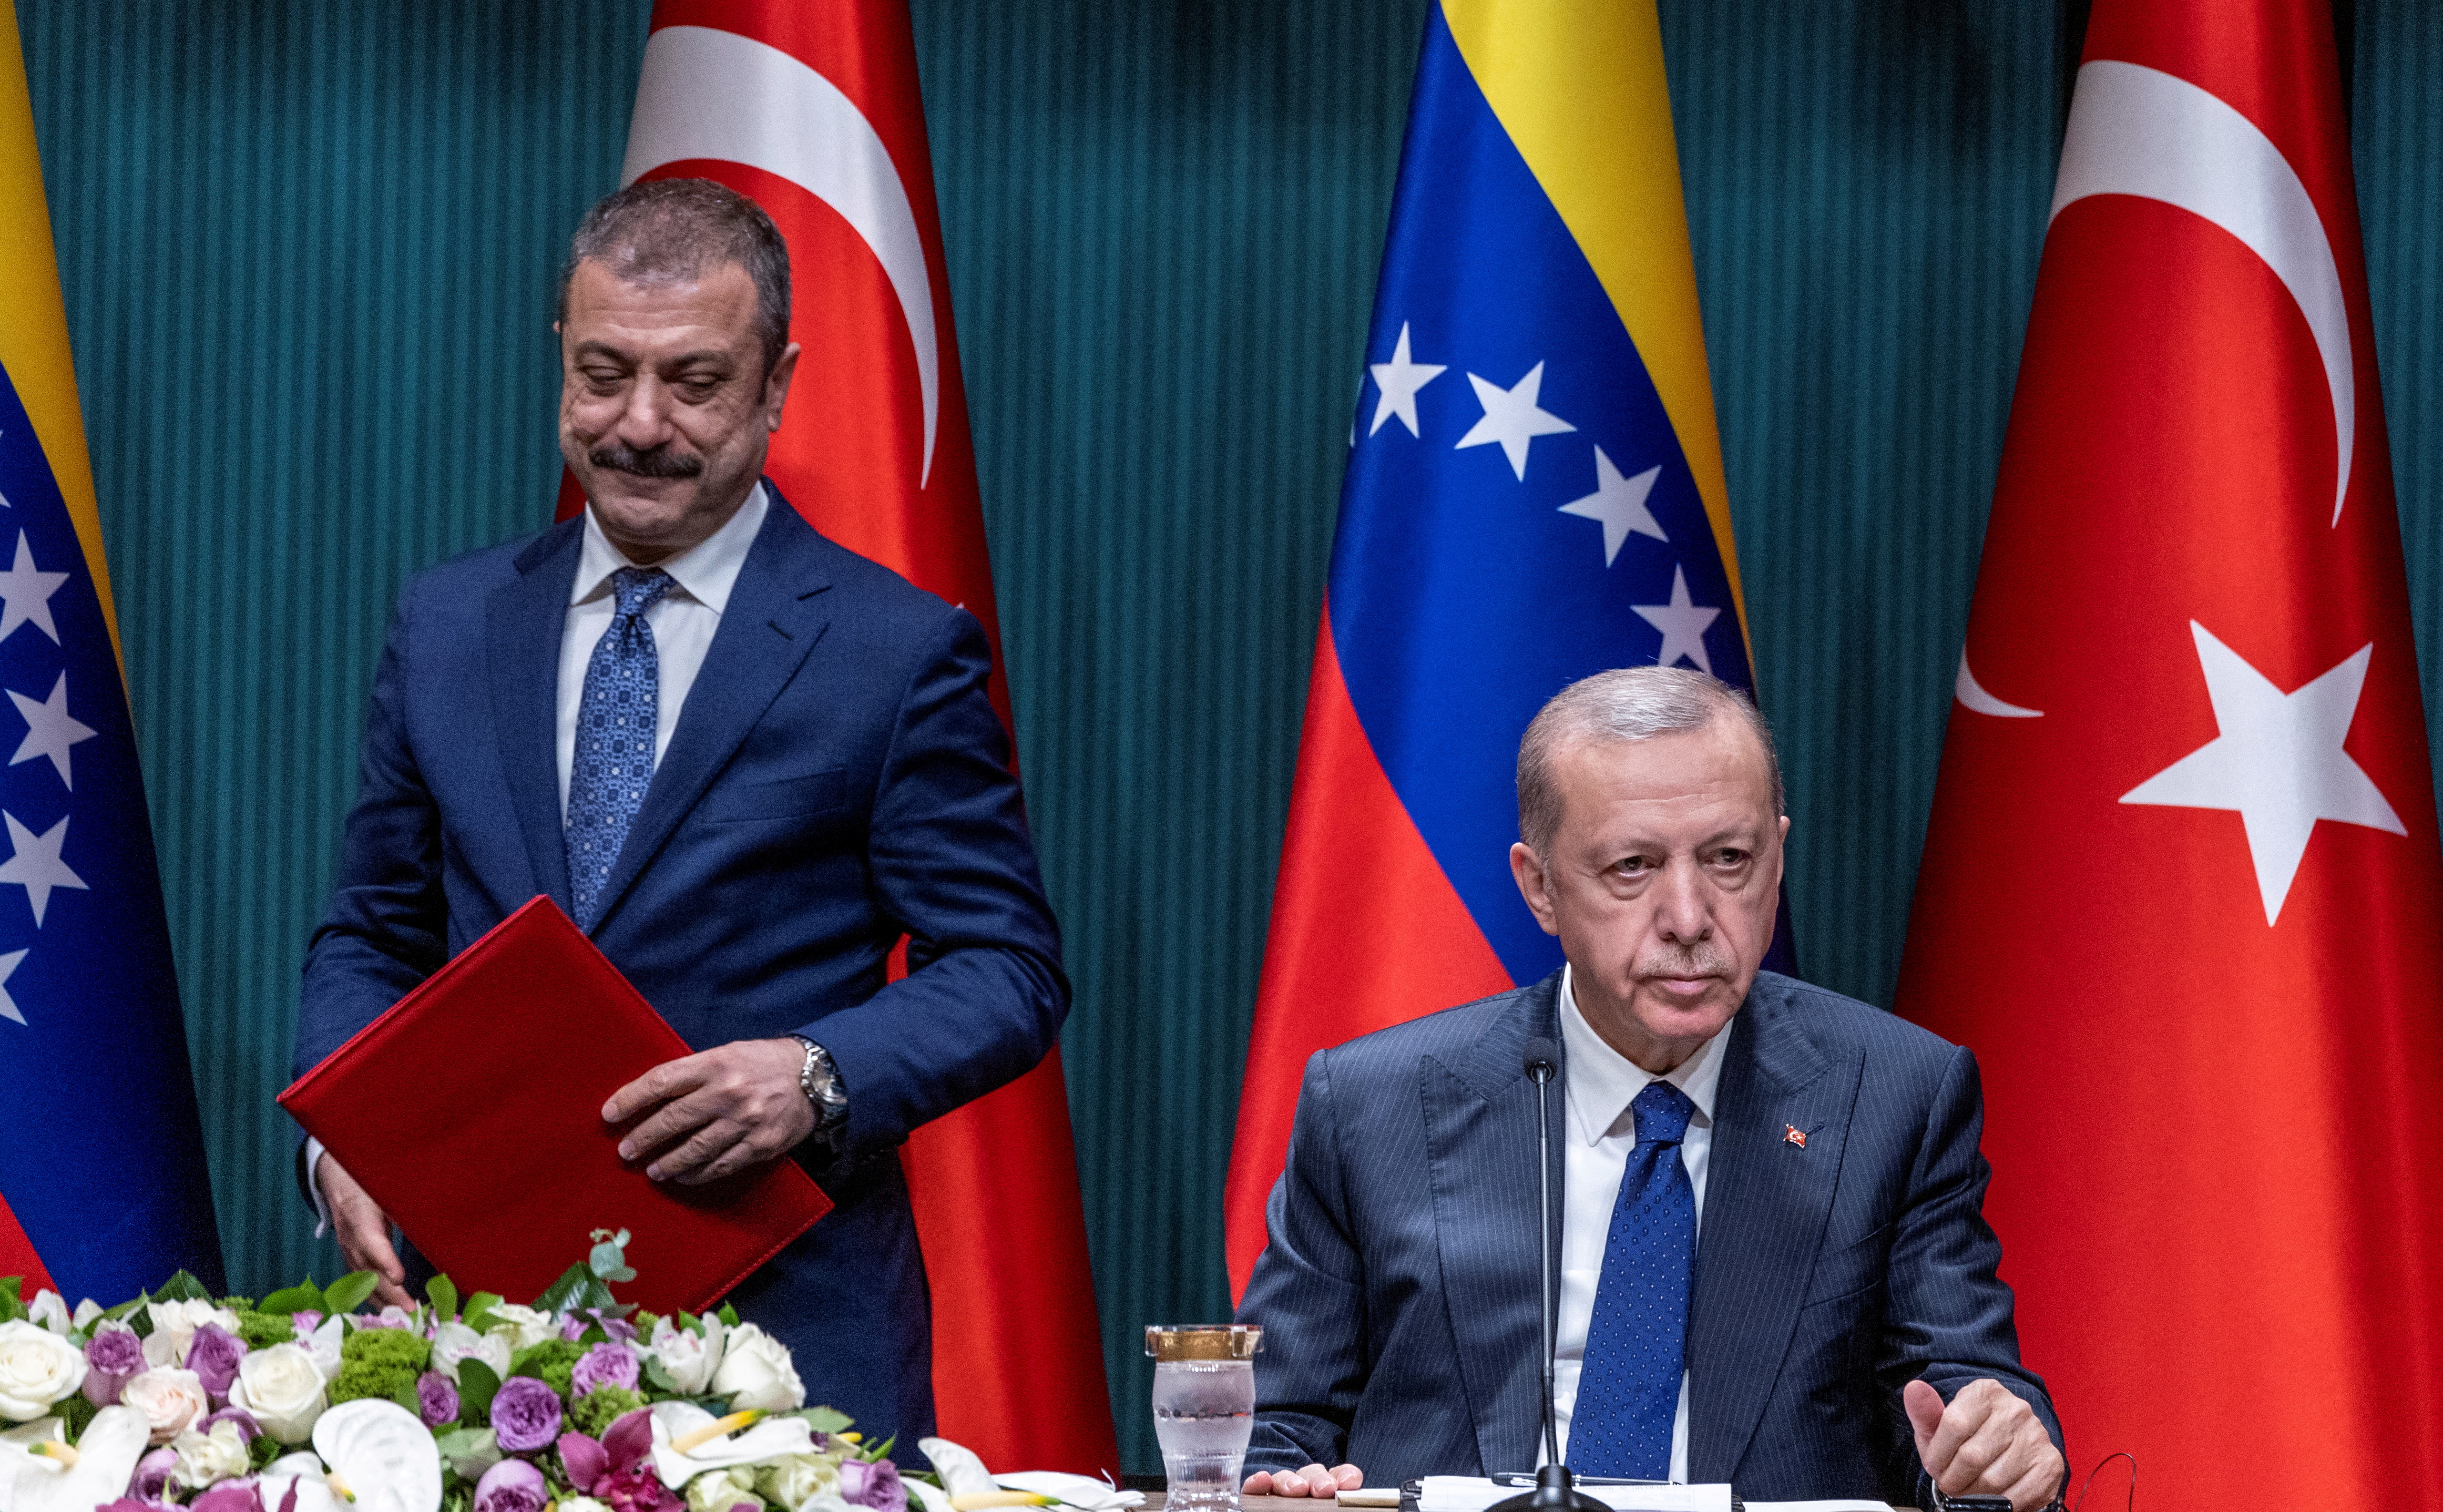 Turkish President Tayyip Erdogan and Central Bank Governor Sahap Kavcioglu are seen during a signing ceremony in Ankara